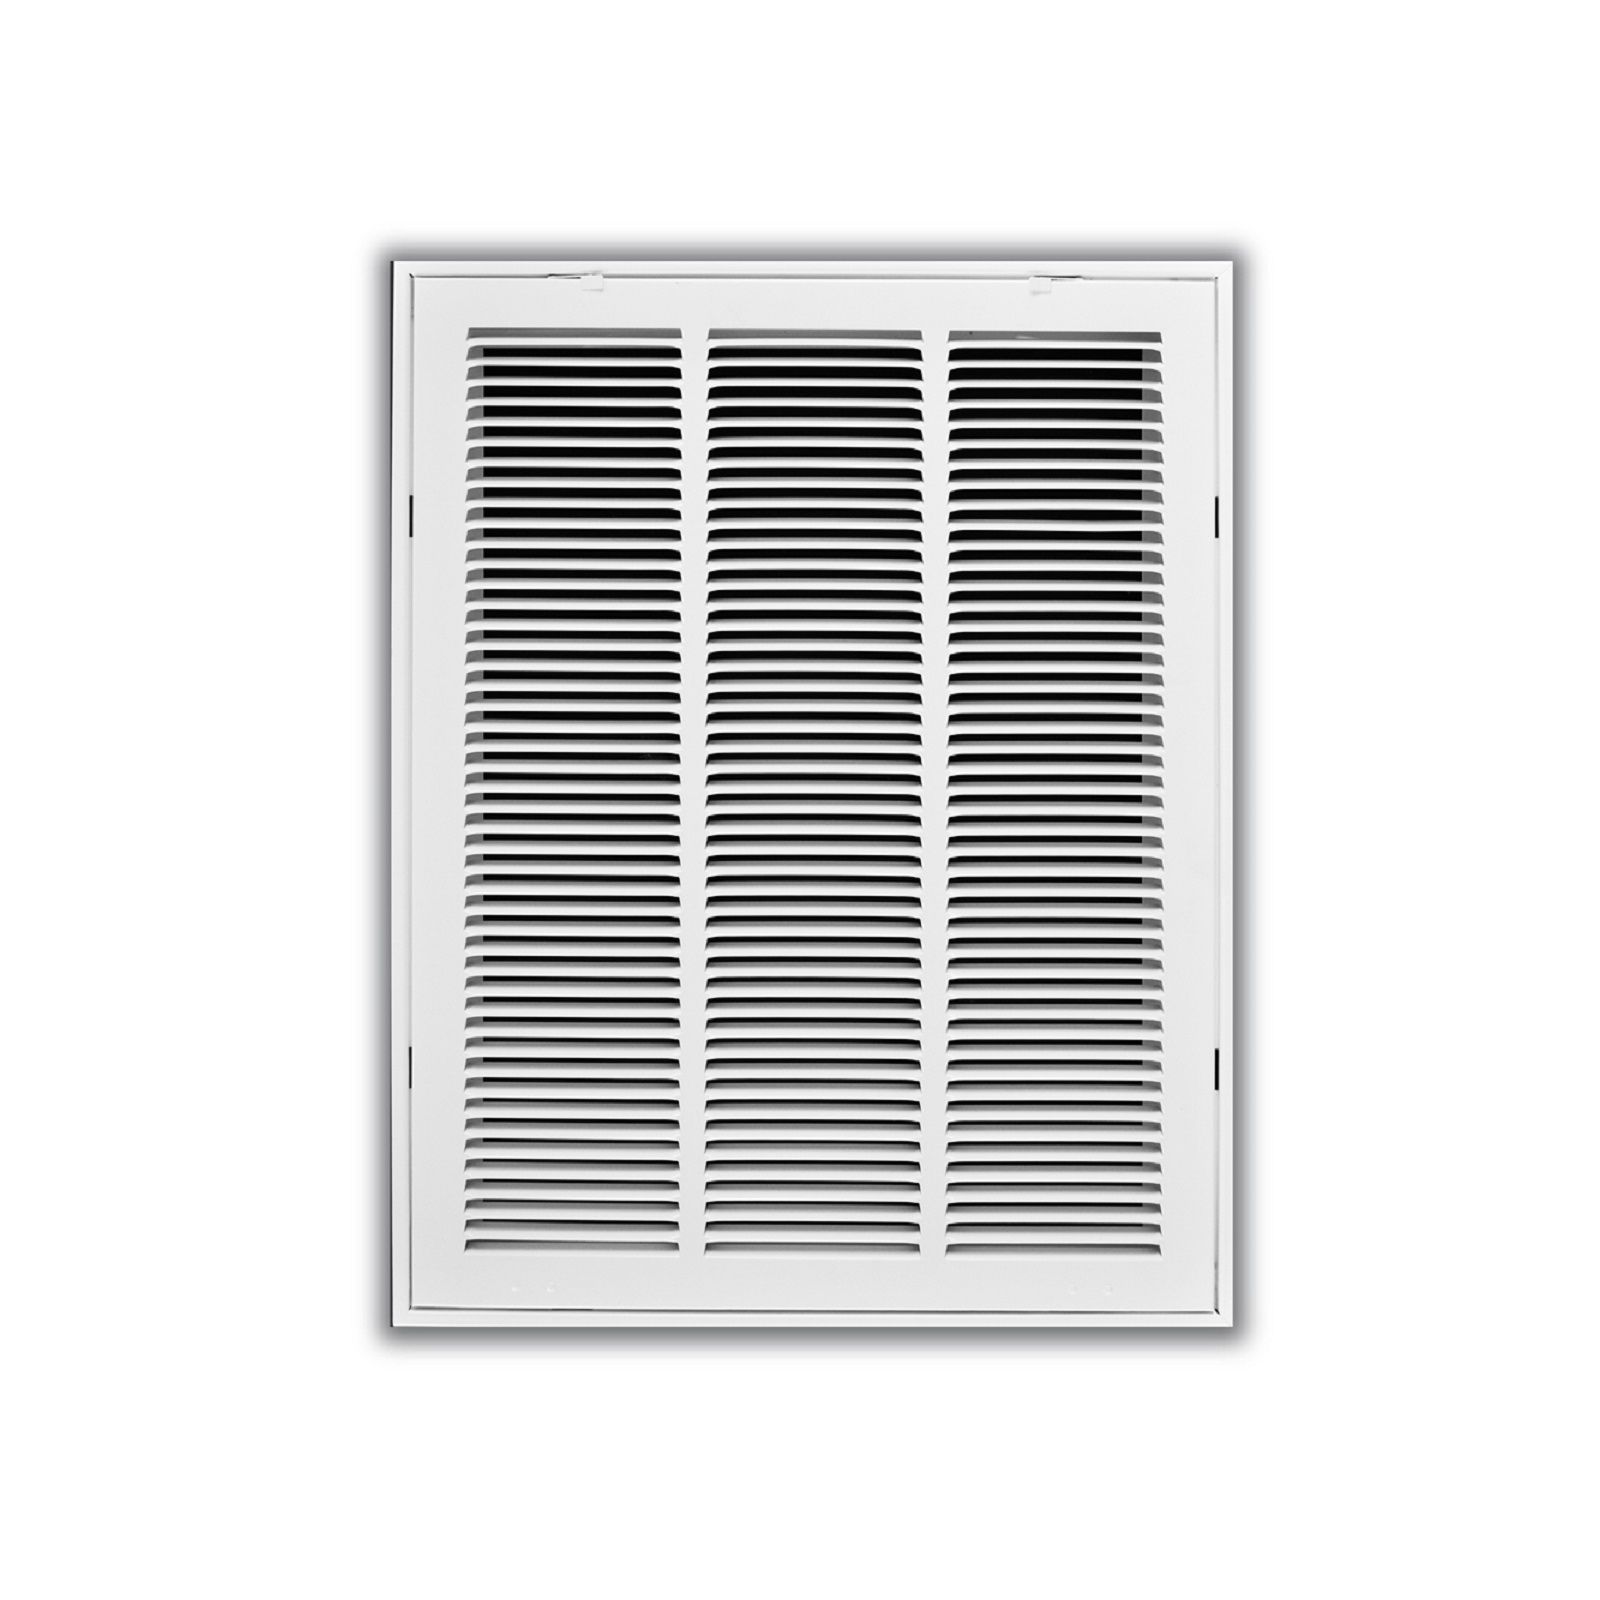 TRUaire 190 20X25 - Steel Return Air Filter Grille With Fixed Hinged Face, White, 20" X 25"